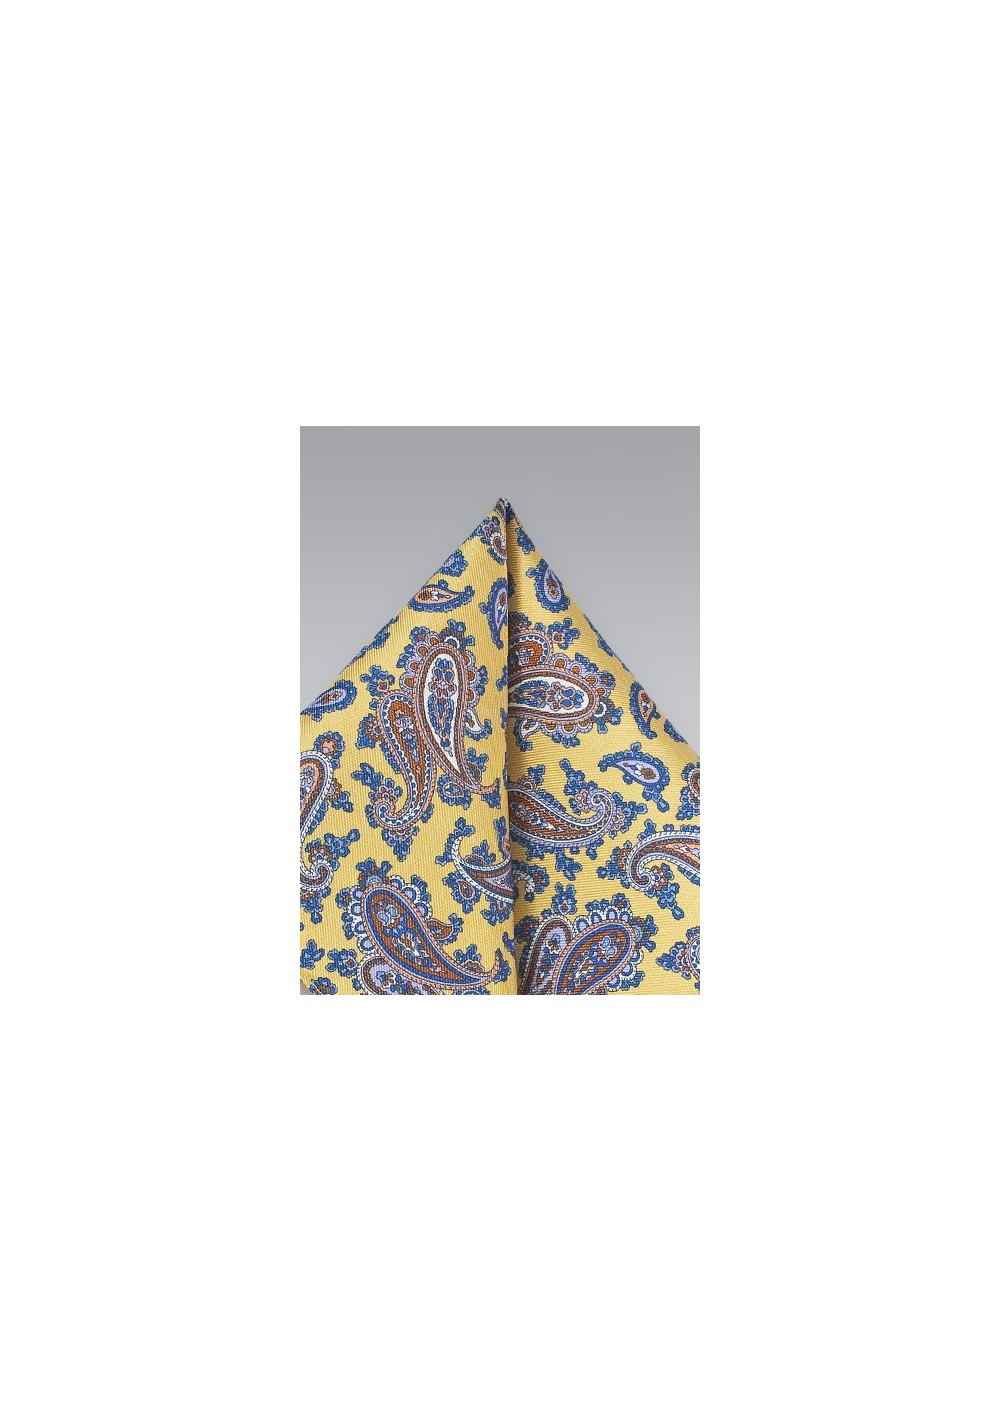 Summer Paisley Pocket Square in Yellow and Blue